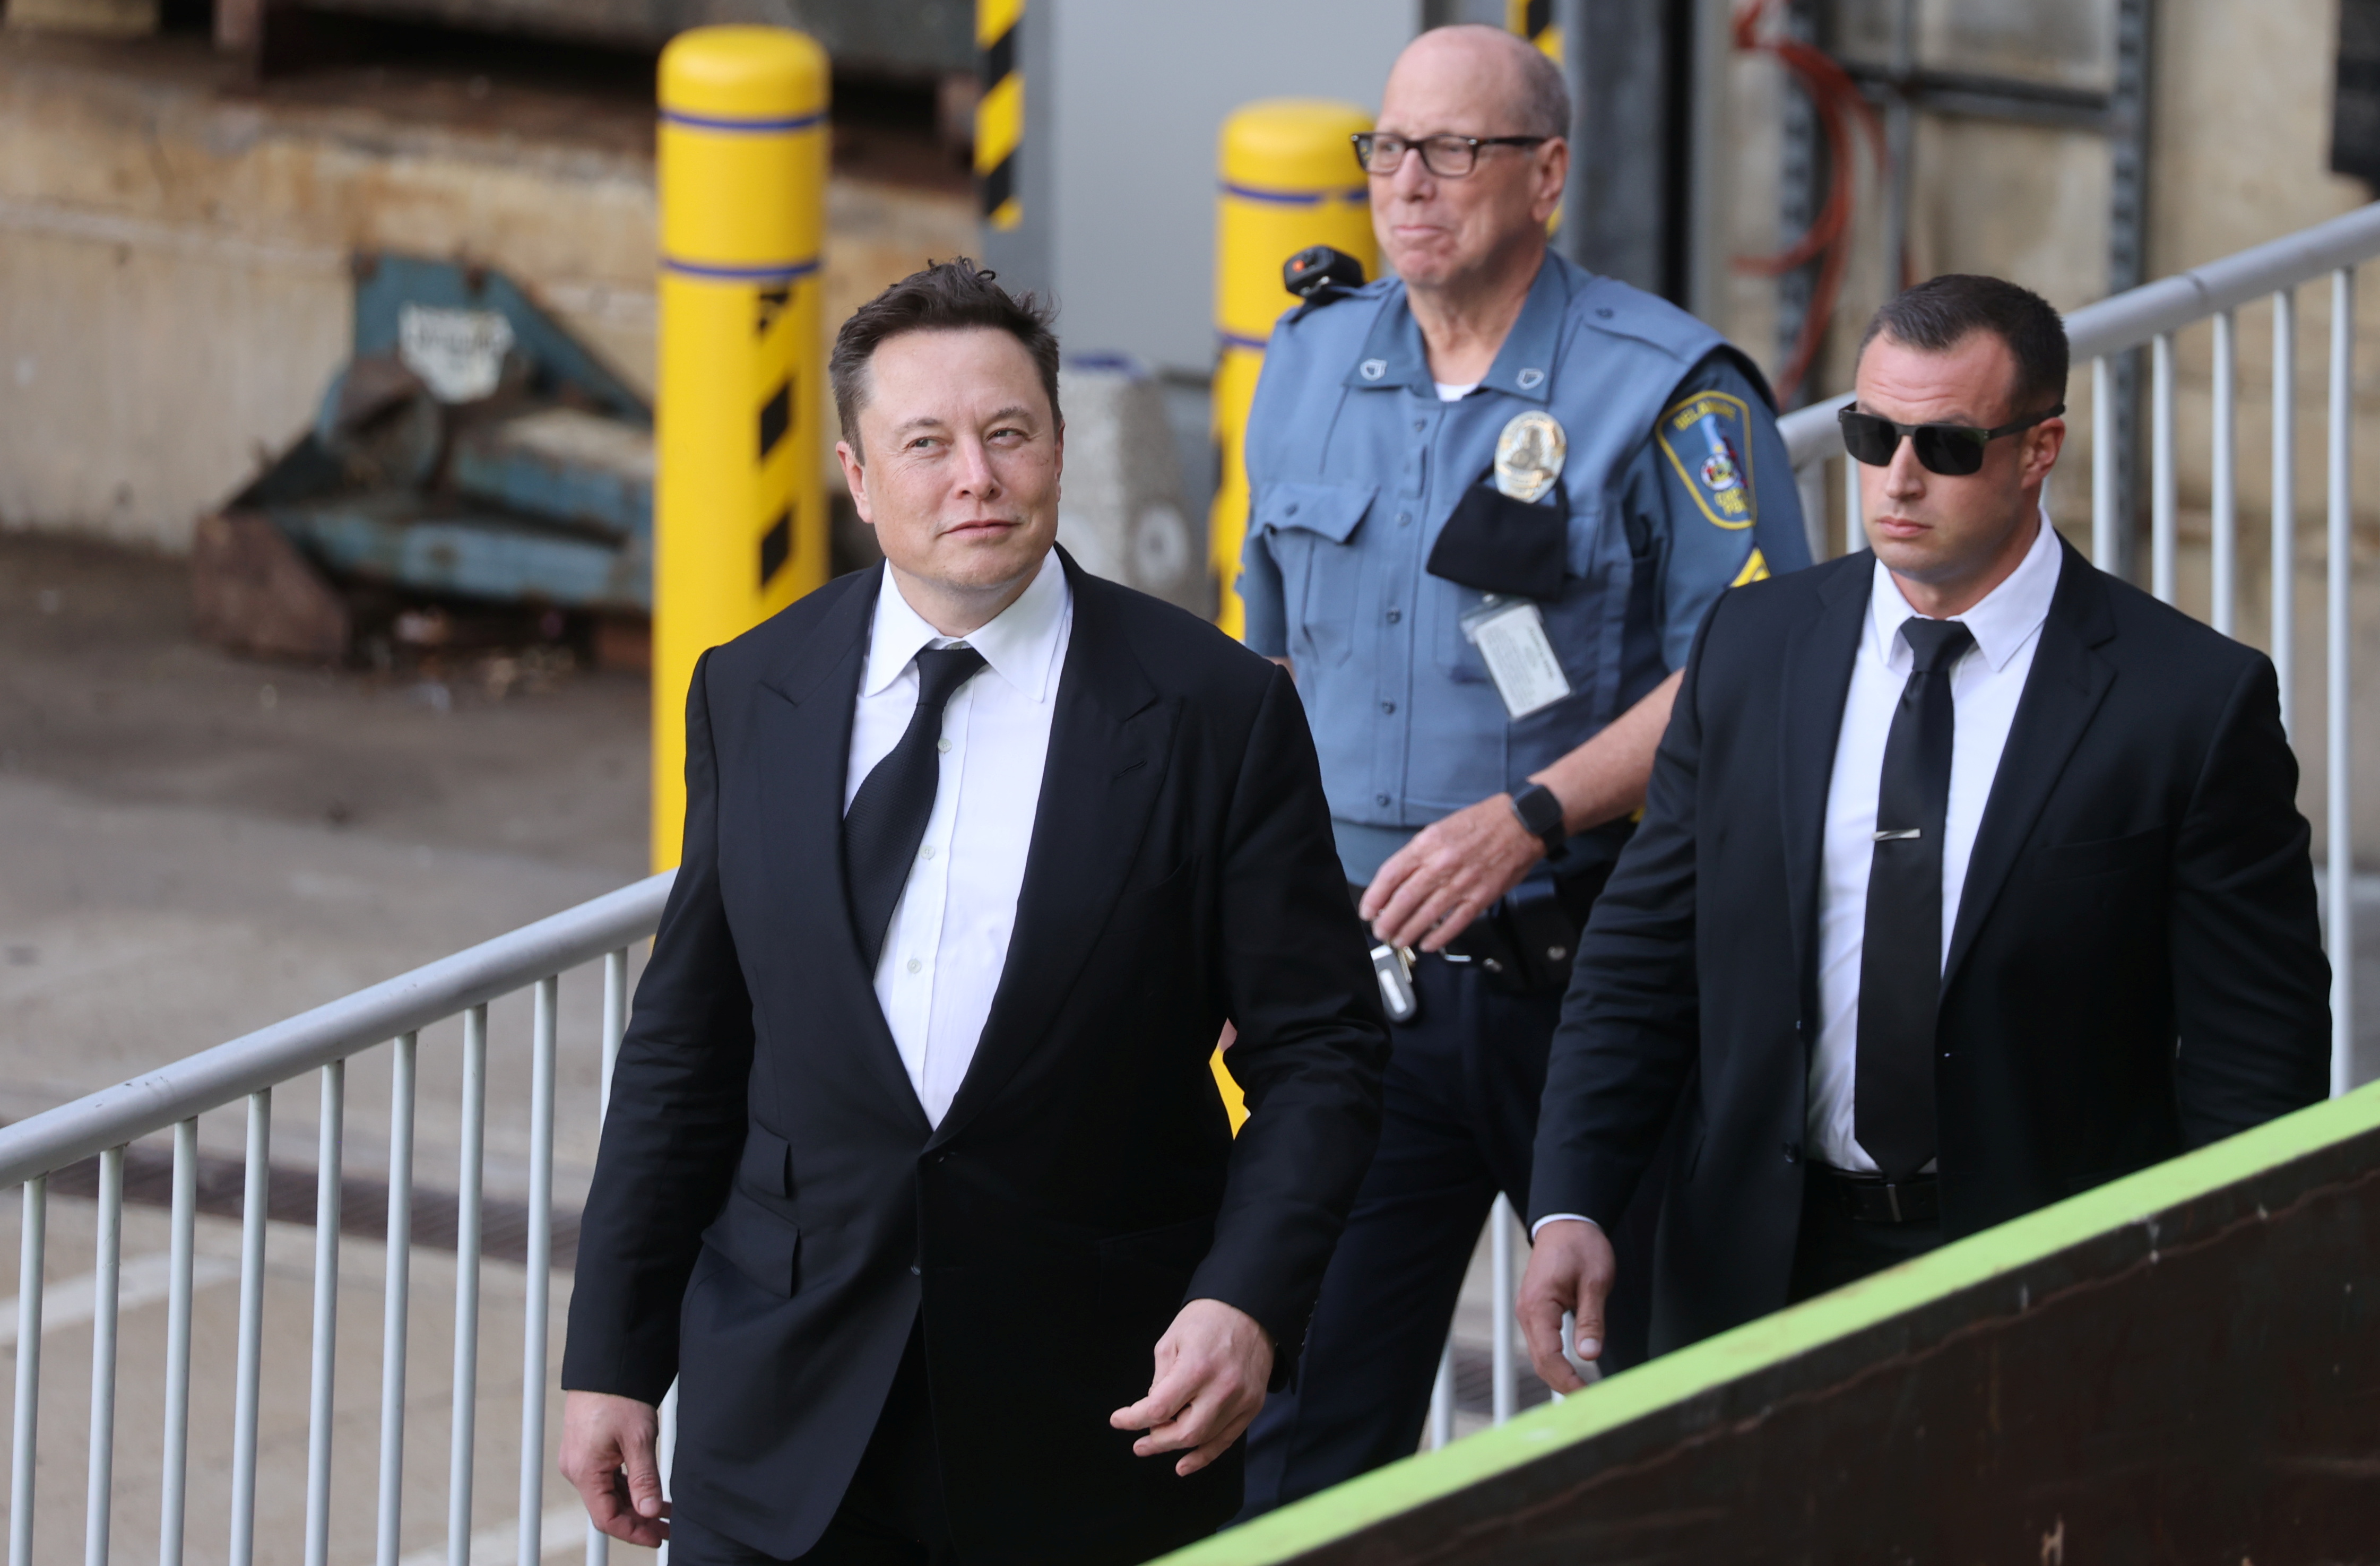 Tesla CEO Elon Musk departs after taking the stand to defend Tesla Inc's 2016 deal for SolarCity in a case before the Delaware Court of Chancery in Wilmington, Delaware, U.S. July 12, 2021. REUTERS/Jonathan Ernst